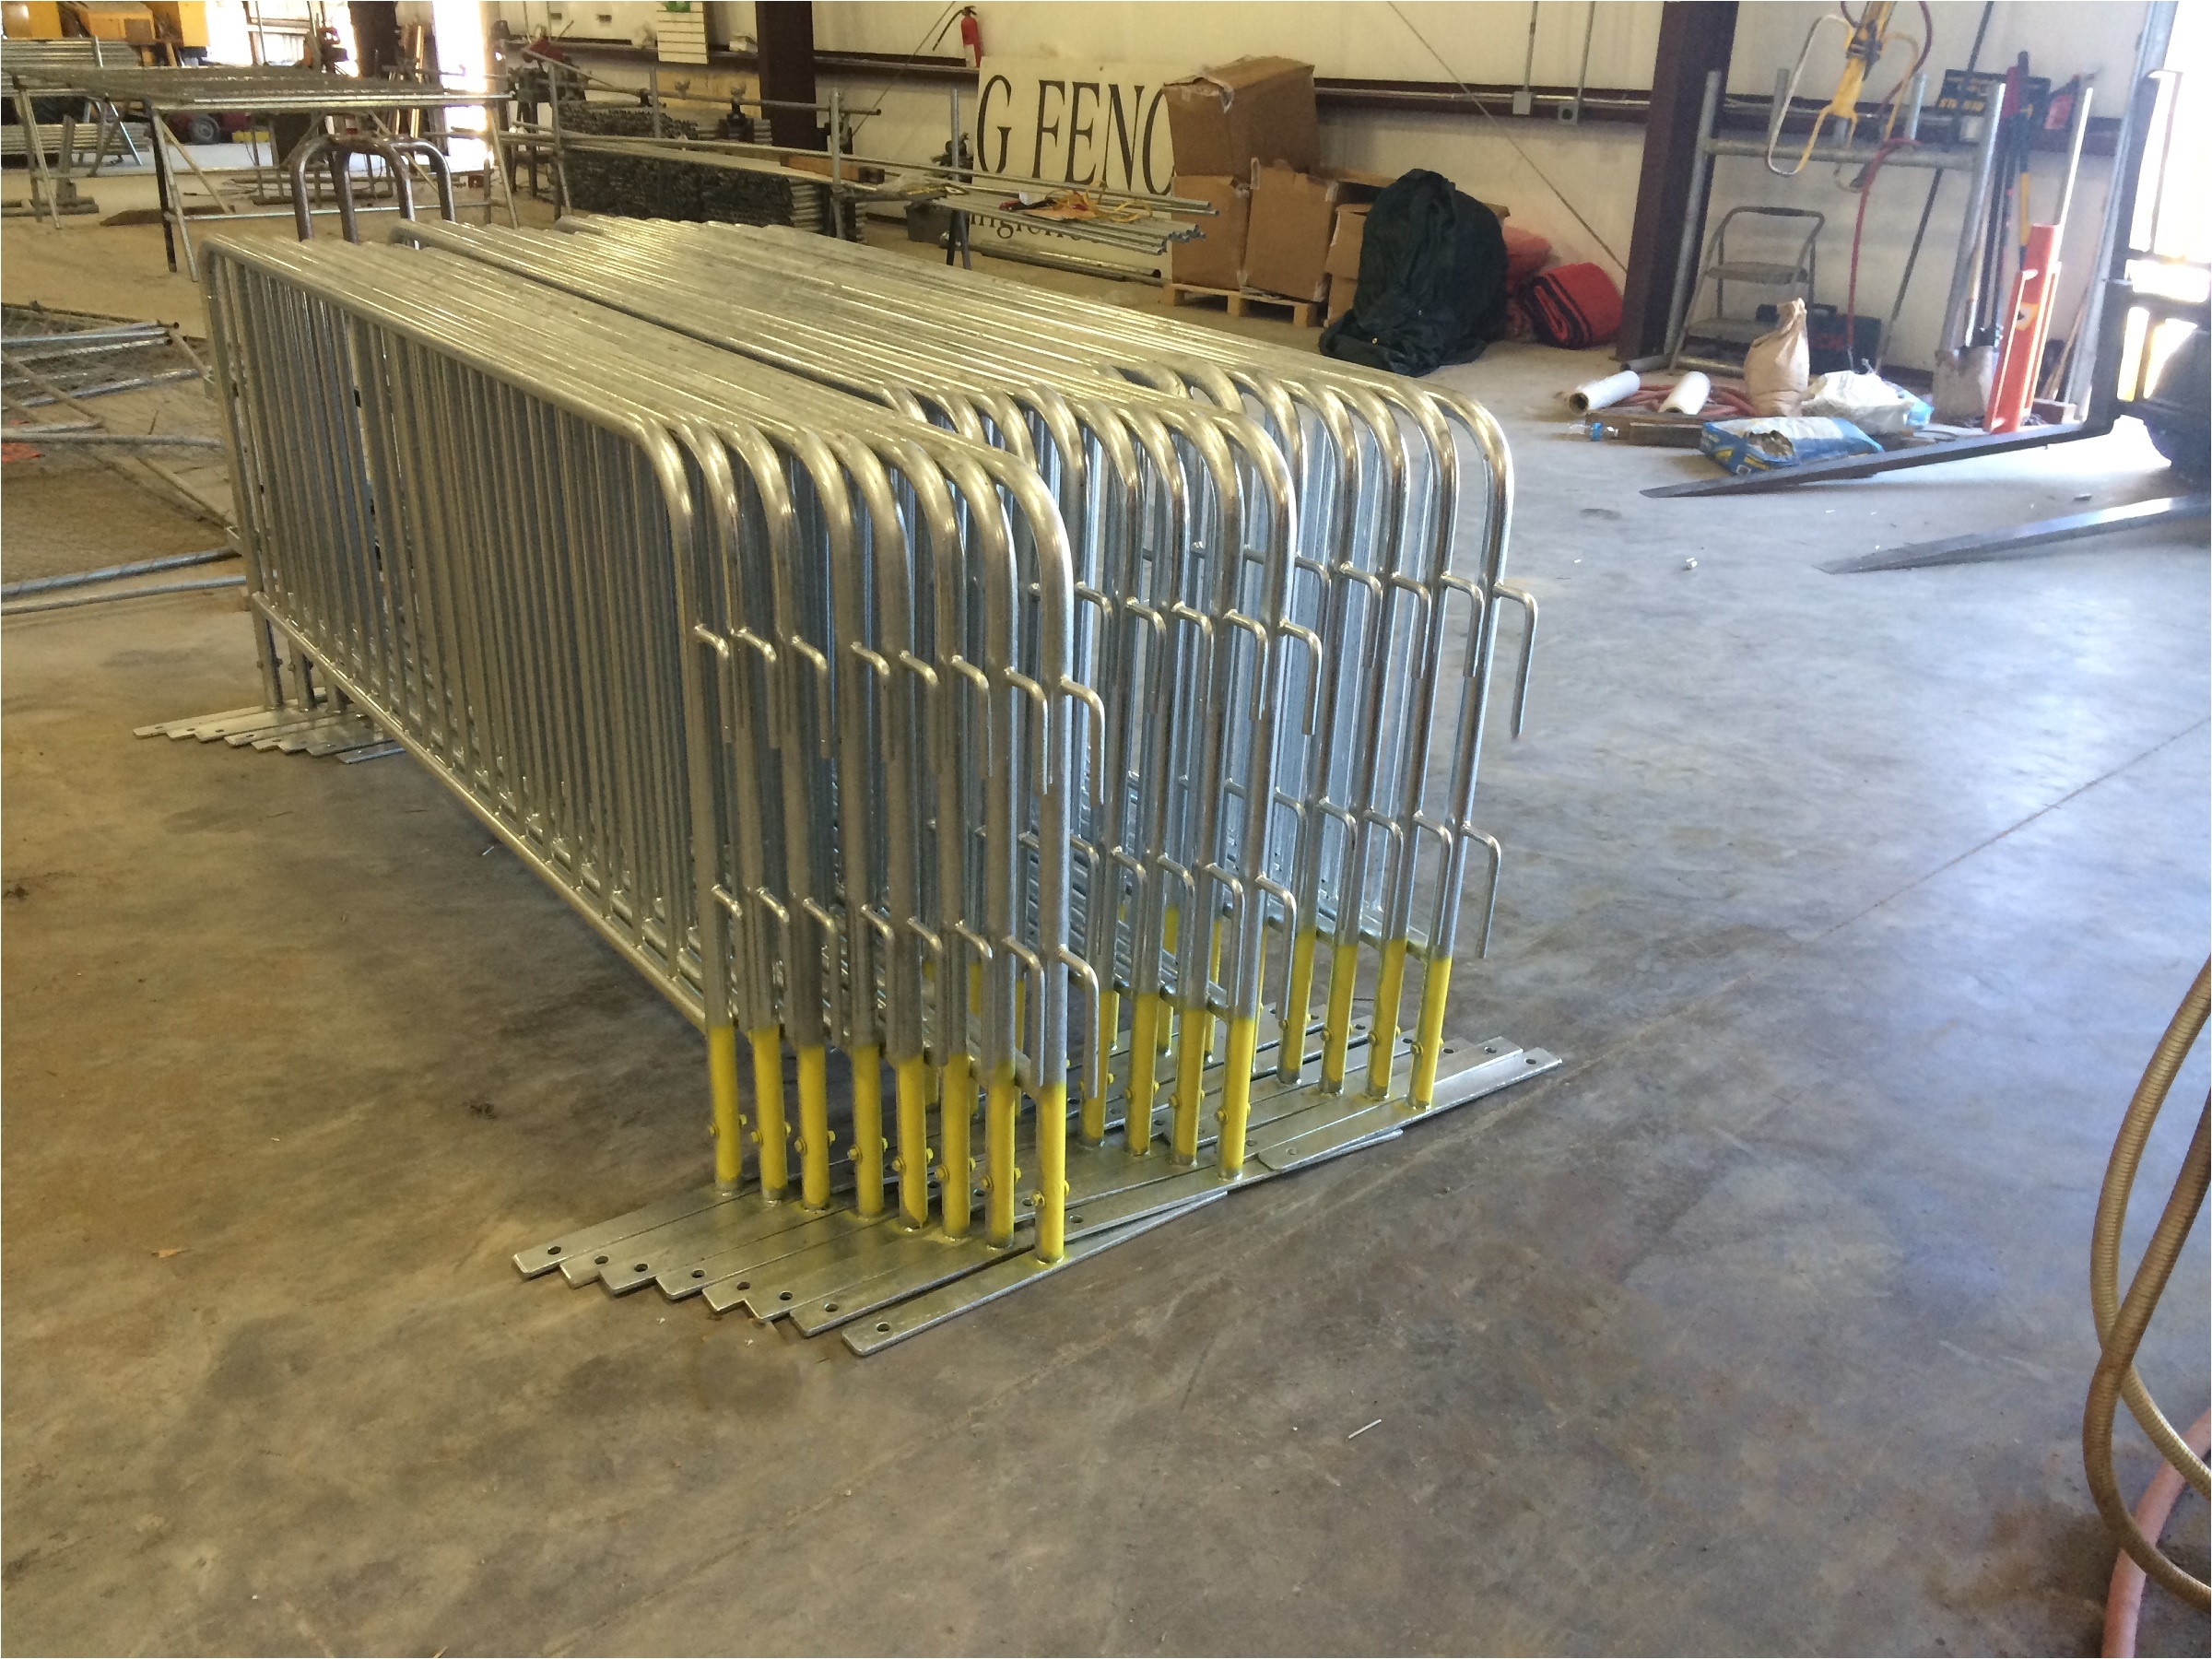 need barricades for rent viking fence has a solution for you